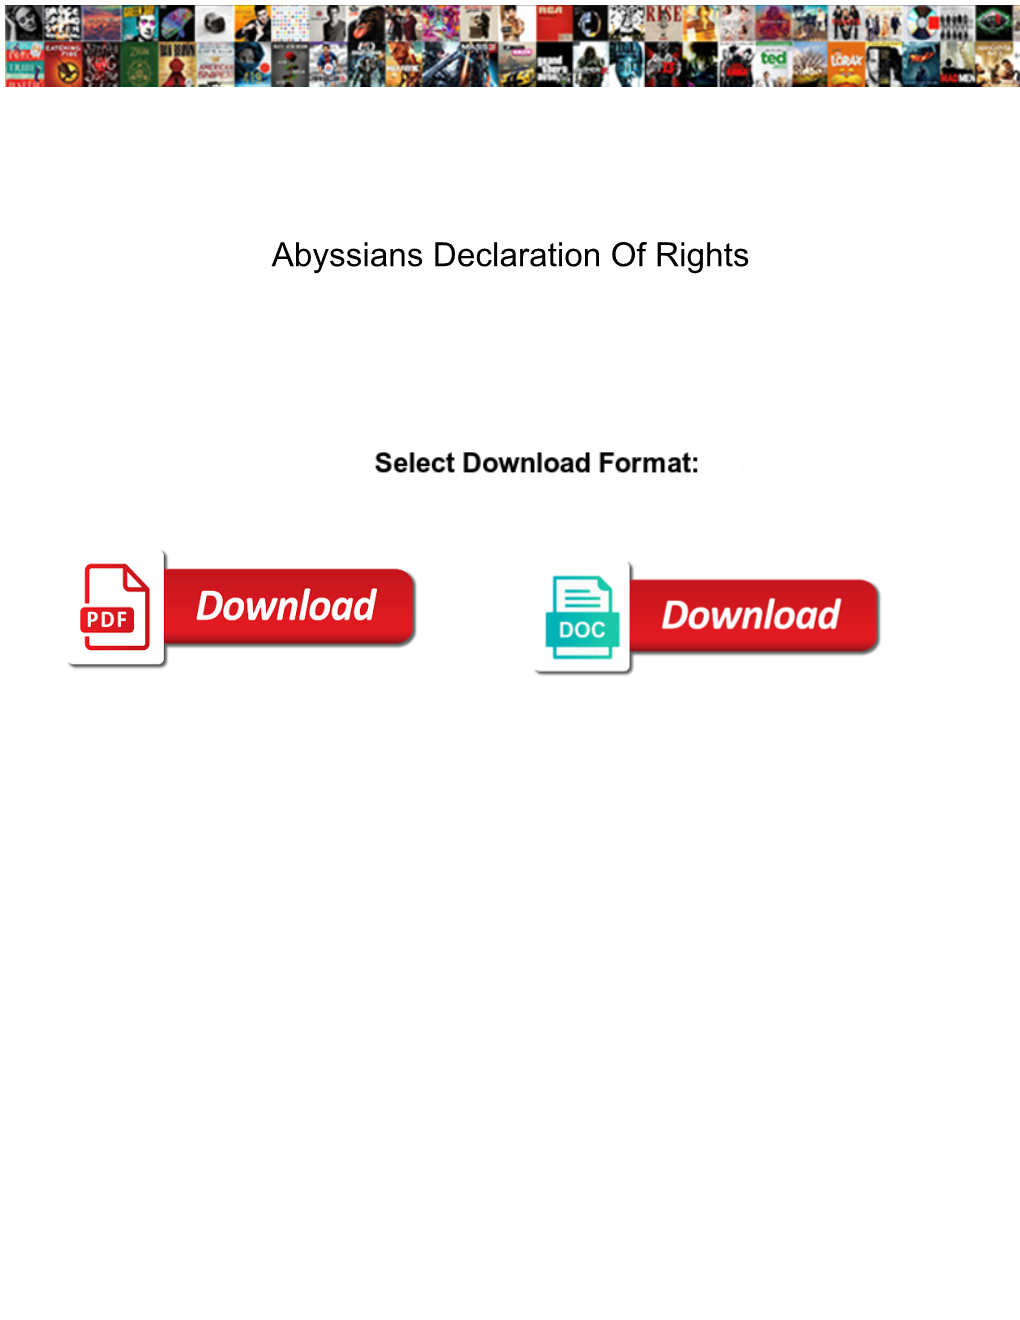 Abyssians Declaration of Rights